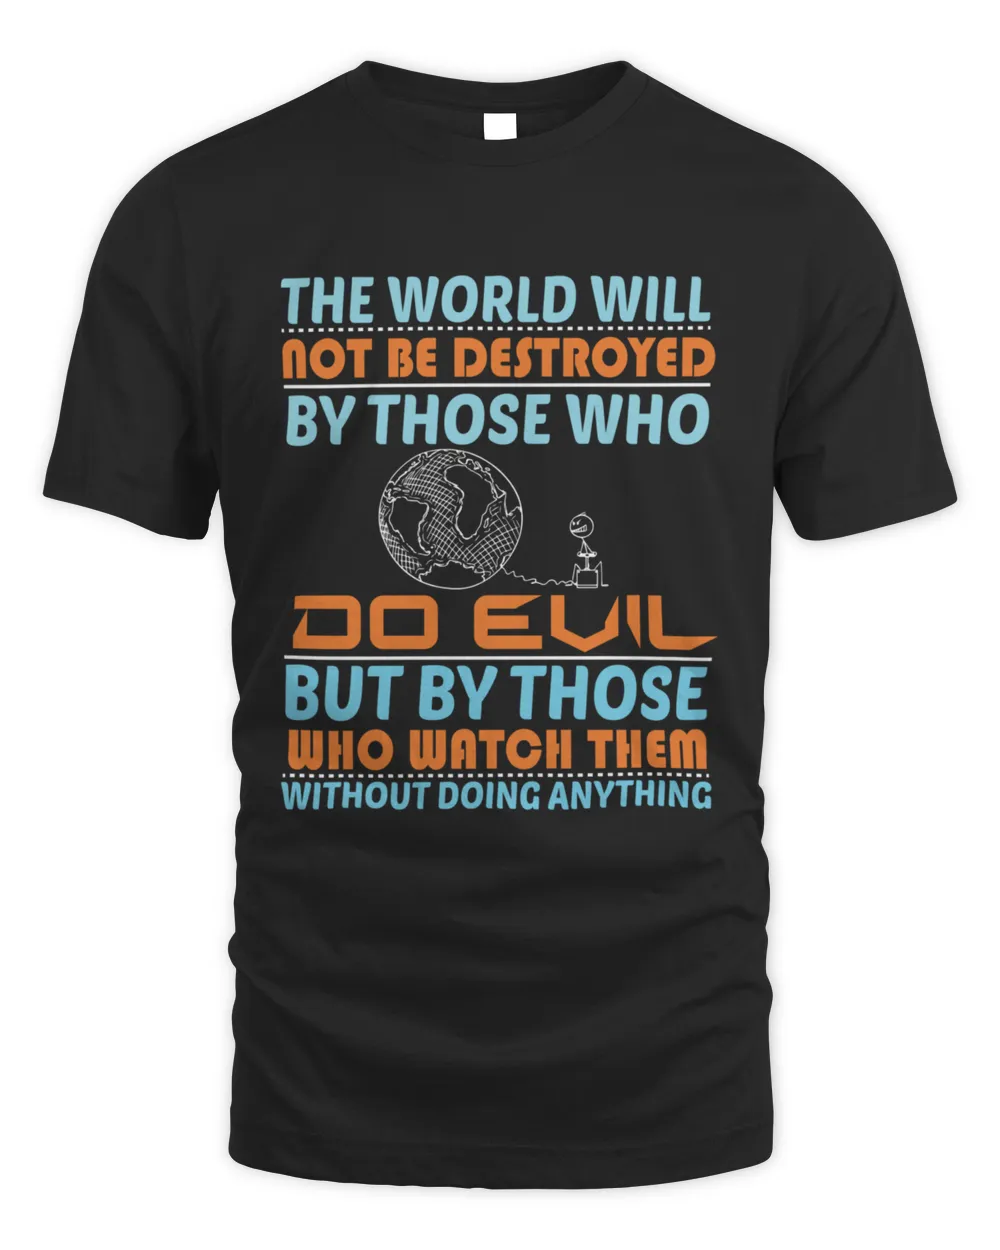 ACTION PROTECTION THE EARTH  T-Shirt